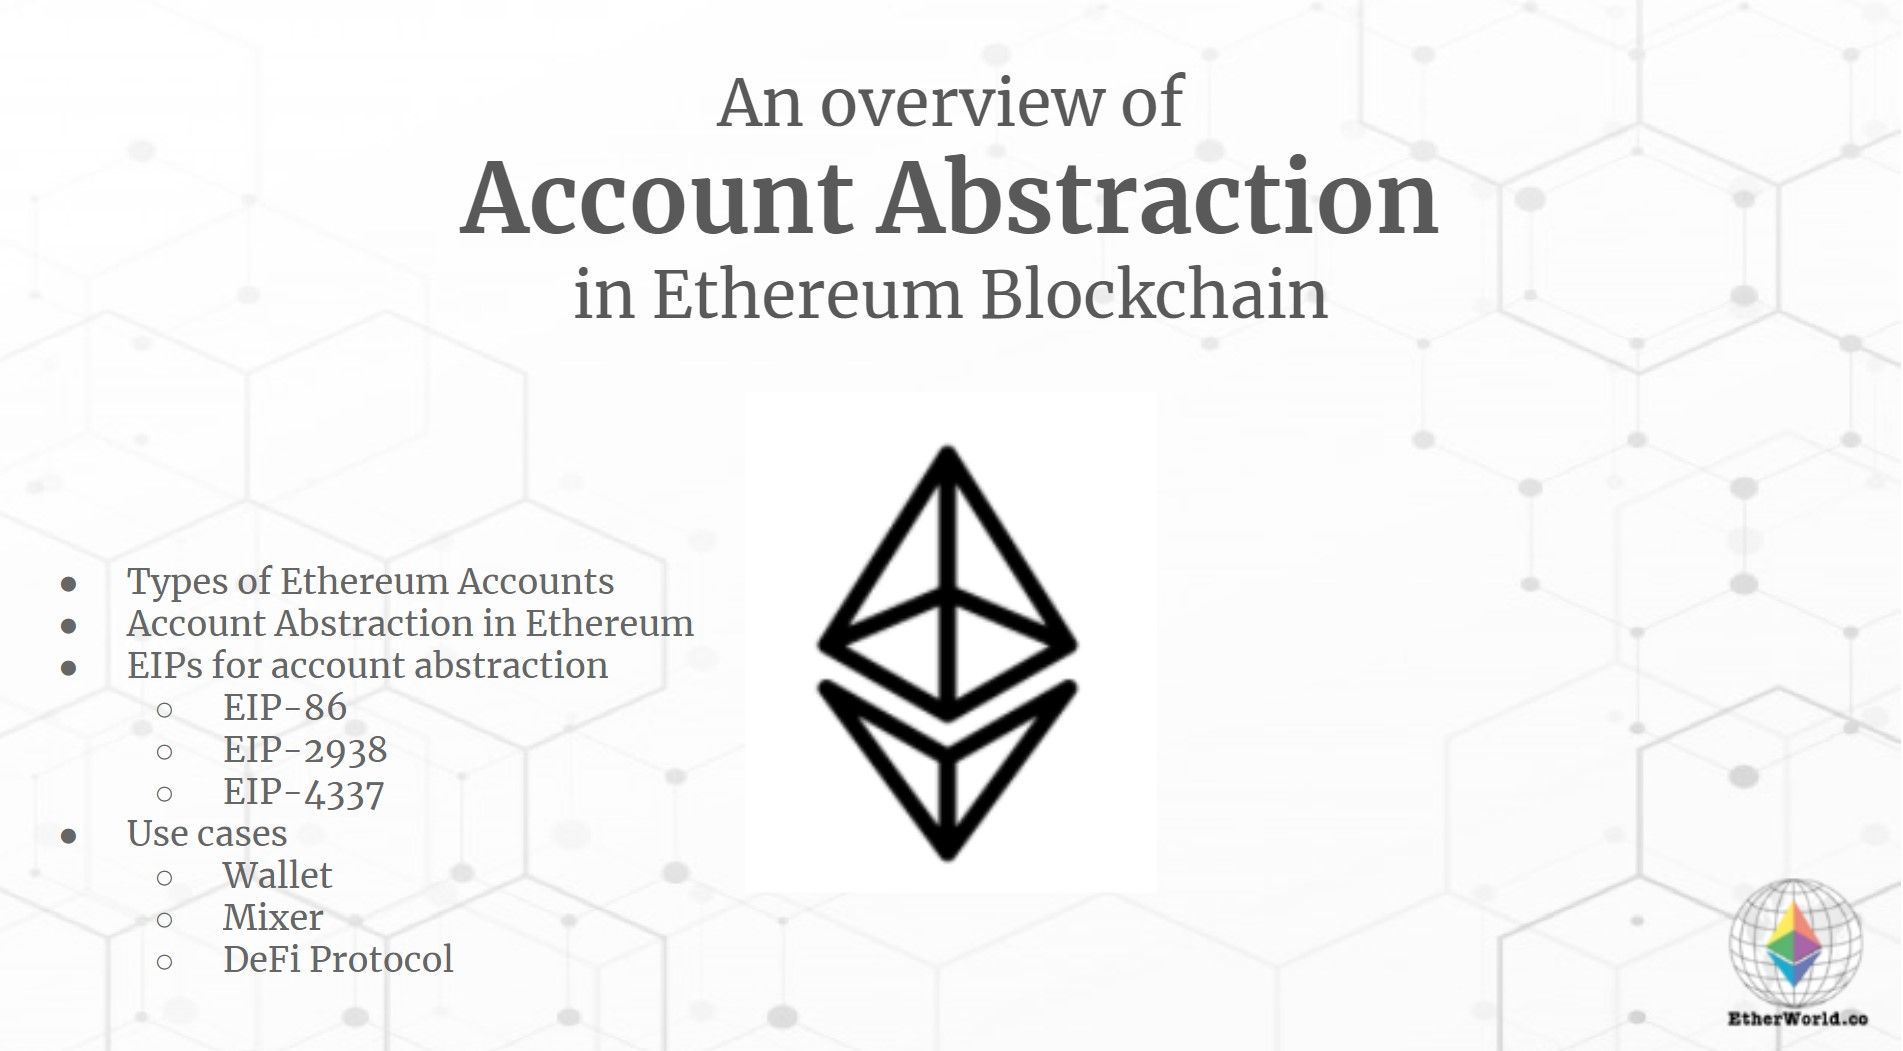 An overview of Account Abstraction in Ethereum blockchain